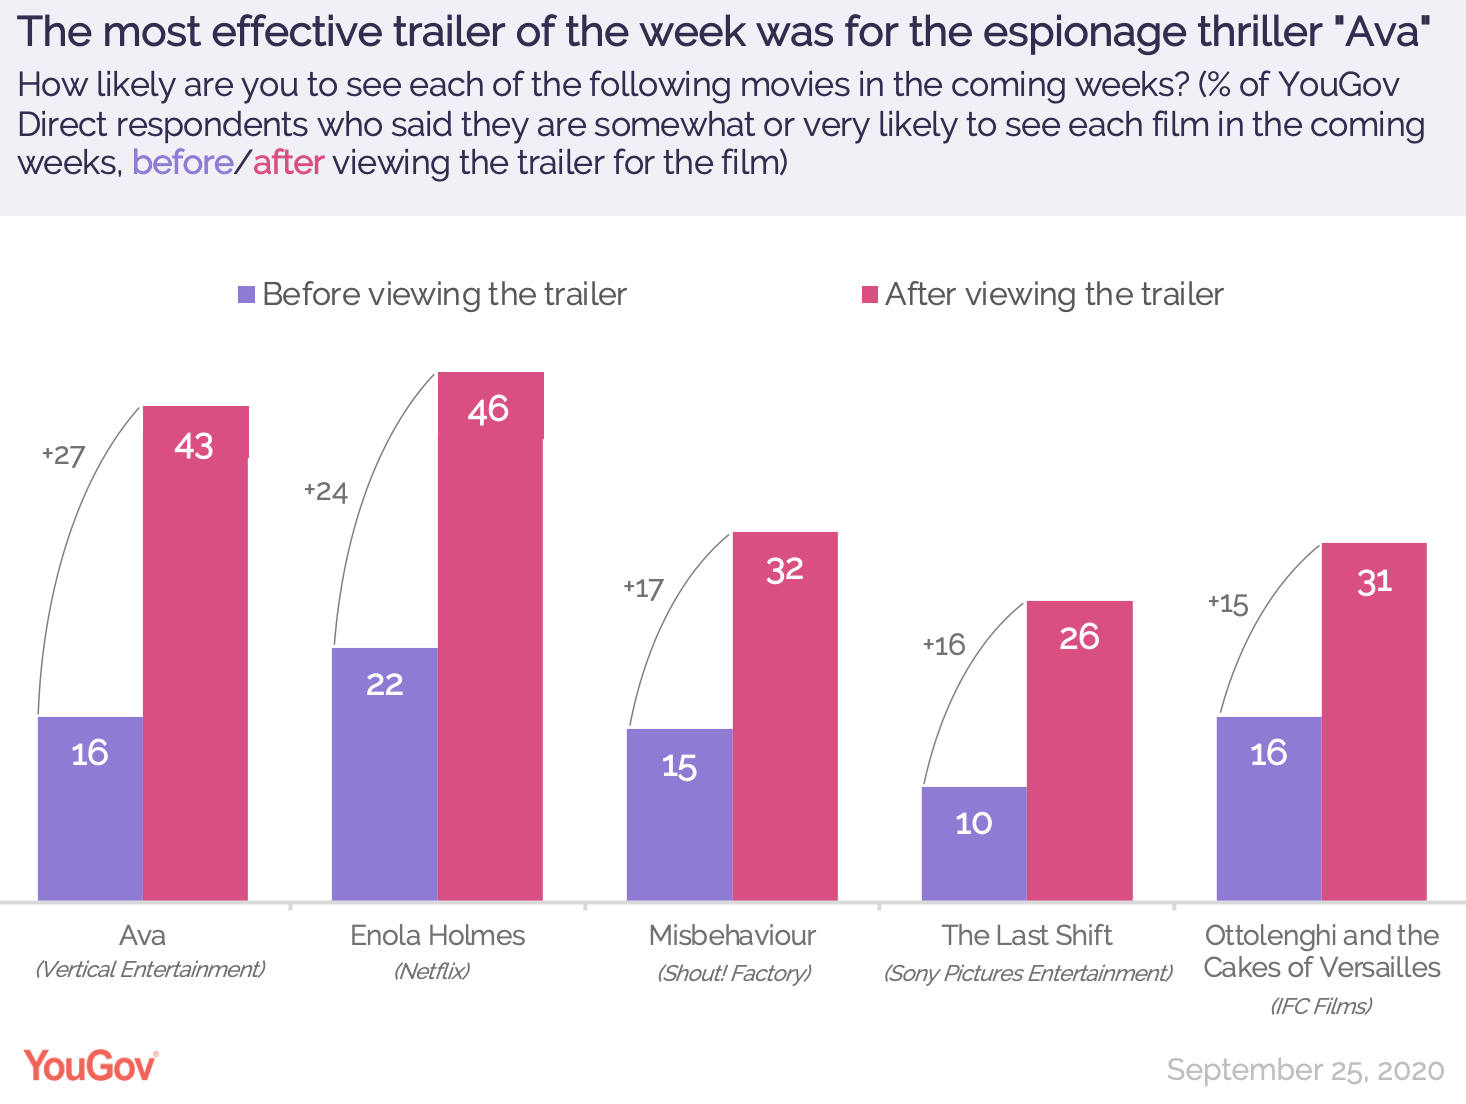 Jessica Chastain S New Espionage Thriller Ava Had The Top Trailer This Week Yougov